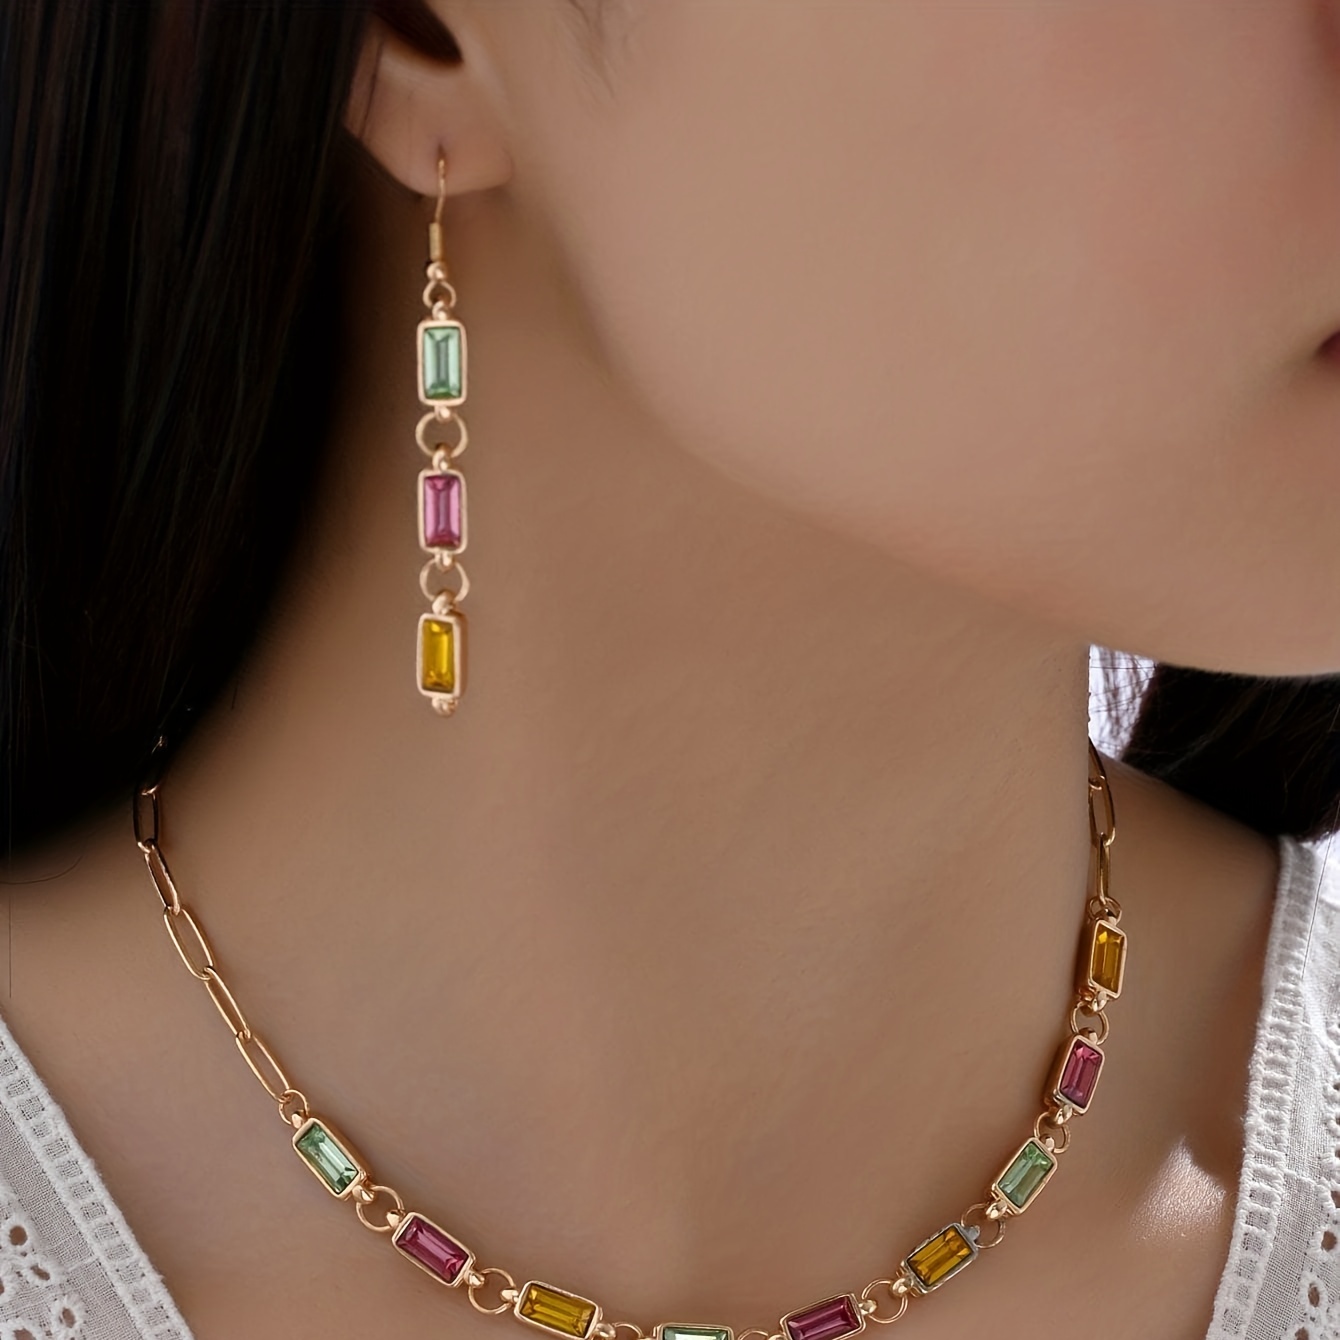 

3pcs Earrings Plus Necklace Luxury Jewelry Set Inlaid Rectangular Rhinestone Multi Colors Mixed Together Strong Sence Of Summer Wear Them To The Beach And Enjoy Your Vacation